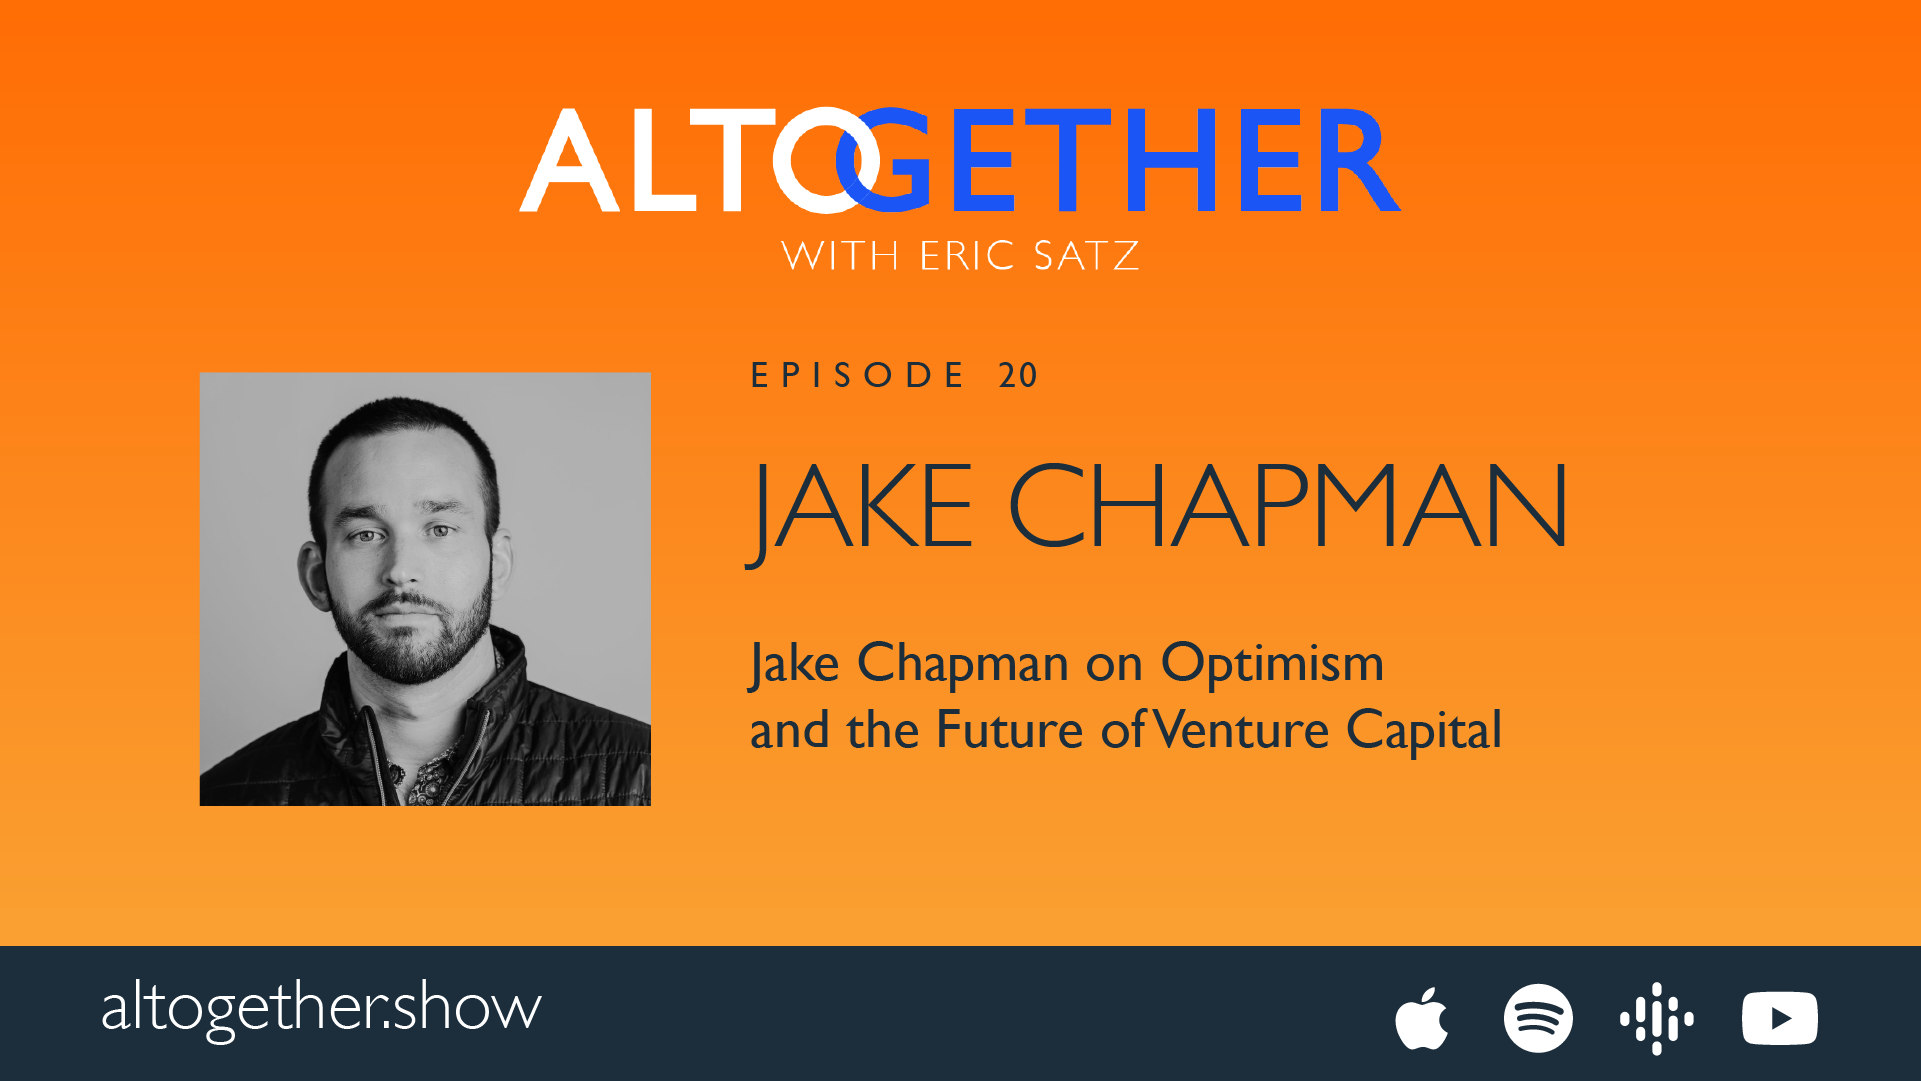 Altogether Show Featuring Jake Chapman